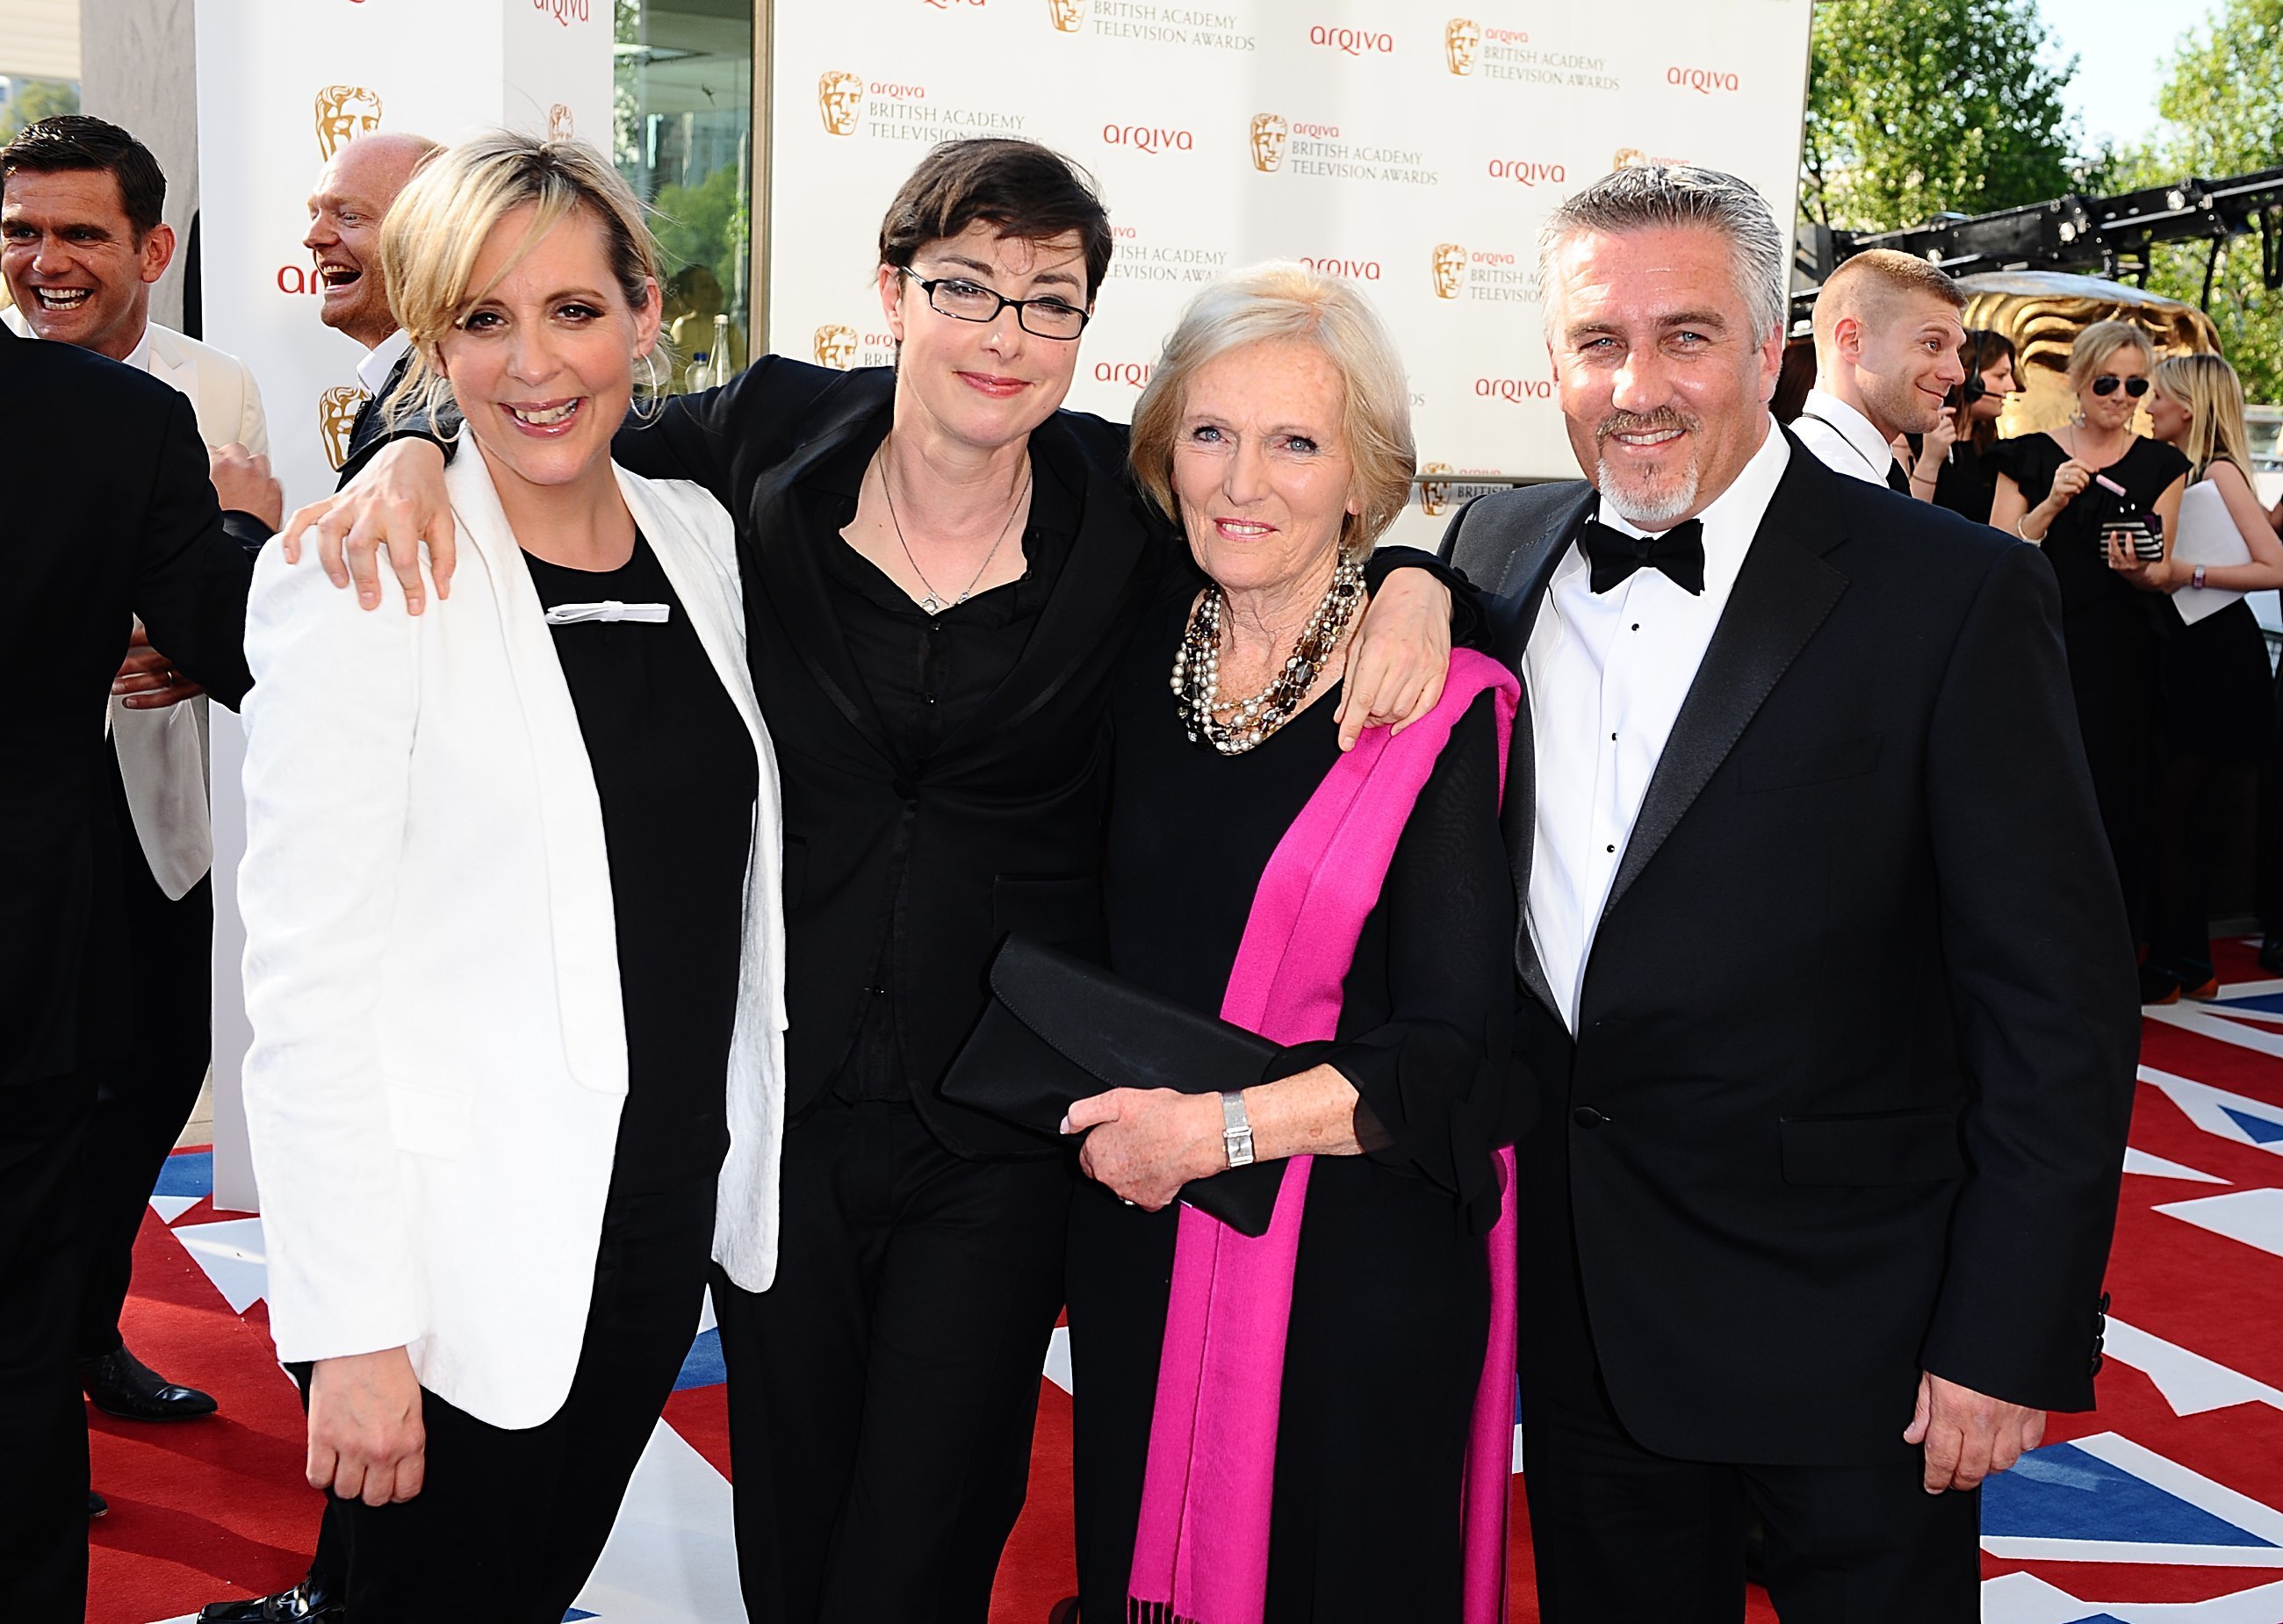 Judges and presenters Mel Giedroyc, Sue Perkins, Mary Berry and Paul Hollywood.